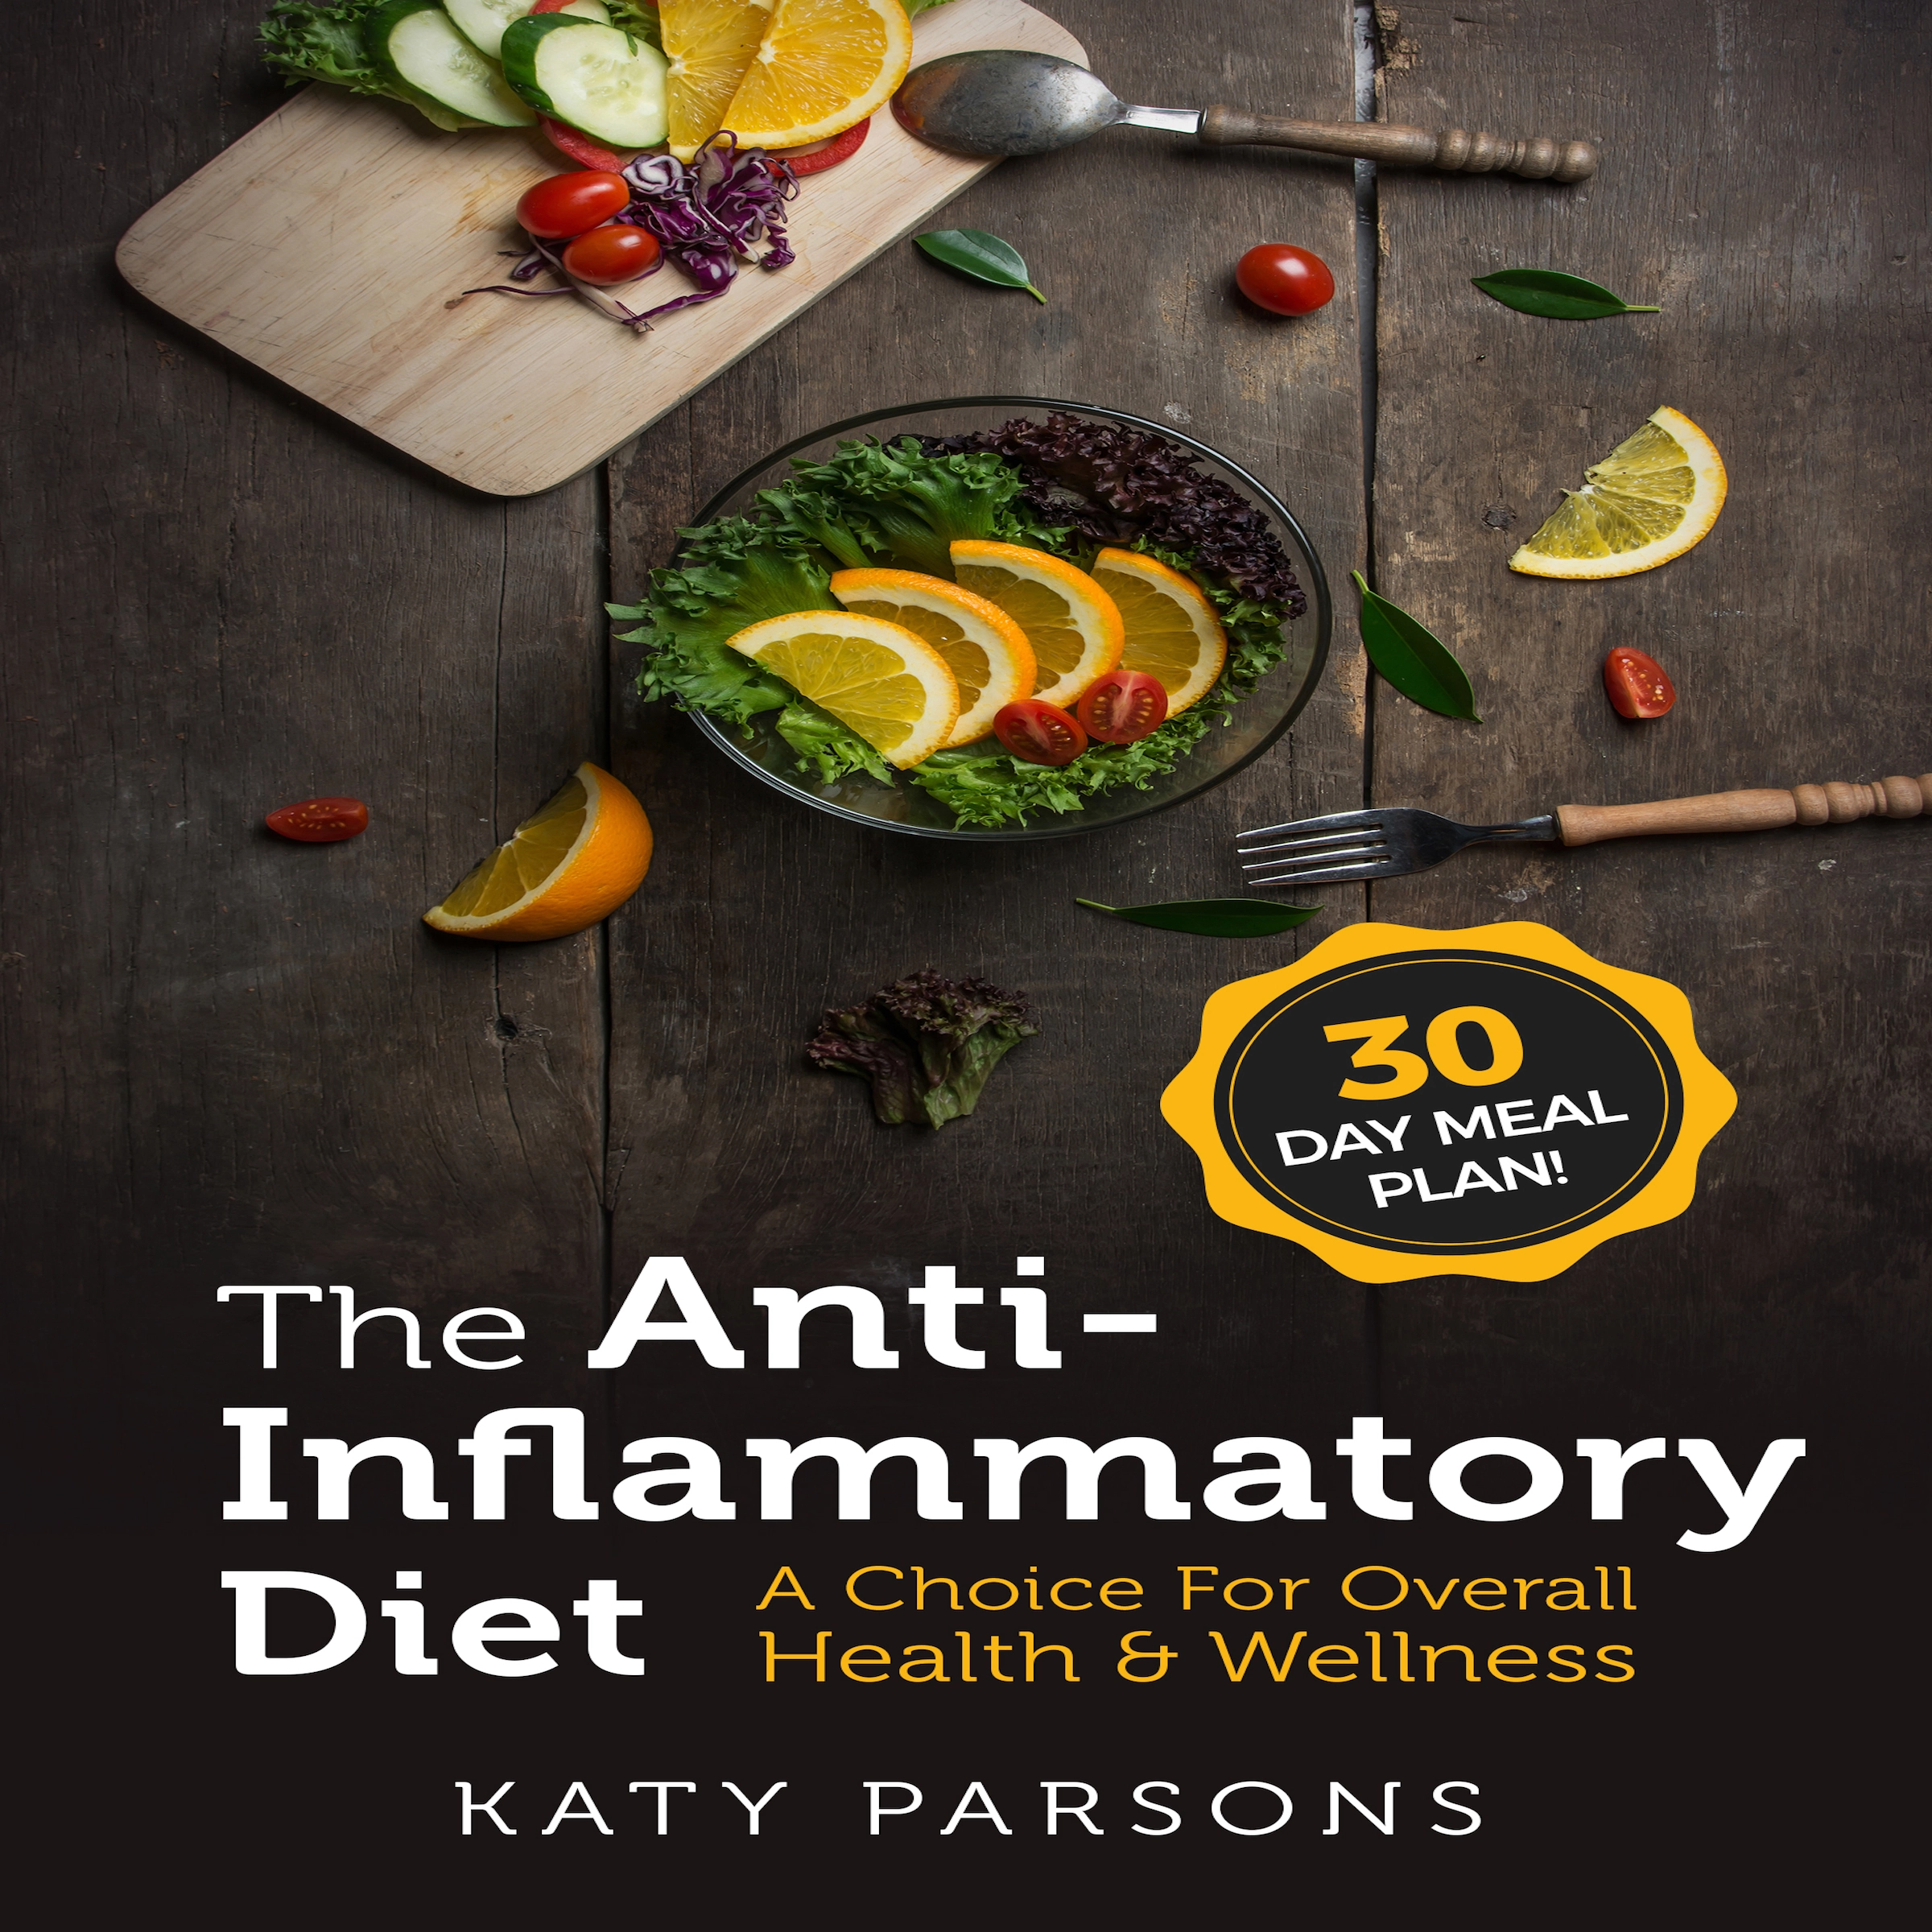 The Anti-Inflammatory Diet: A Choice For Overall Health & Wellness Audiobook by Katy Parsons